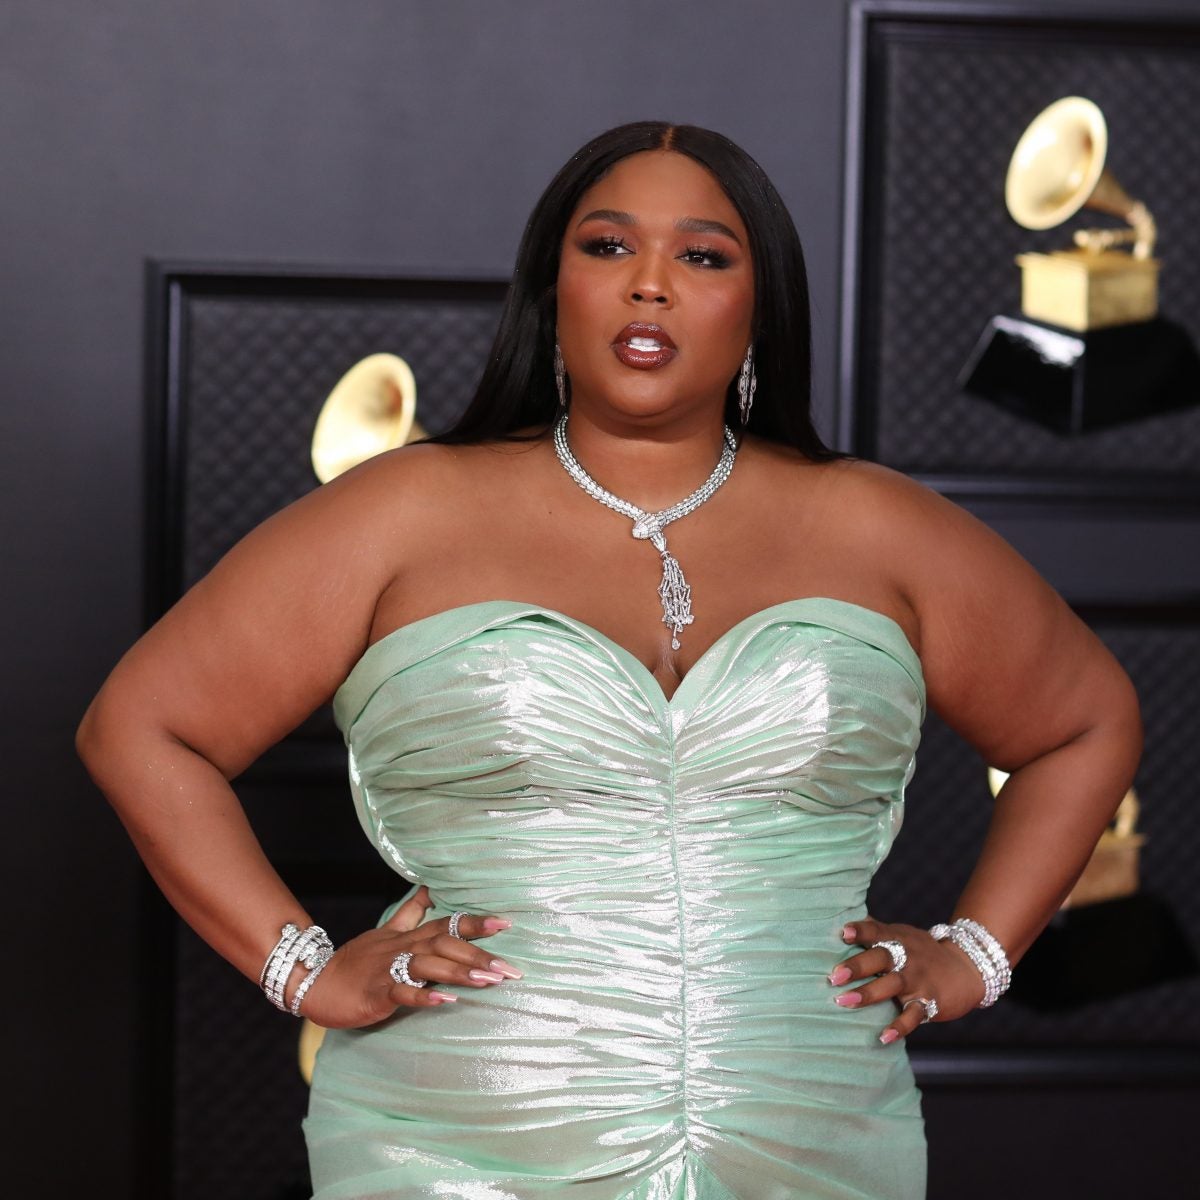 Lizzo Gives A Word On Thin Privilege And The Co-Opting Of Body Positivity: